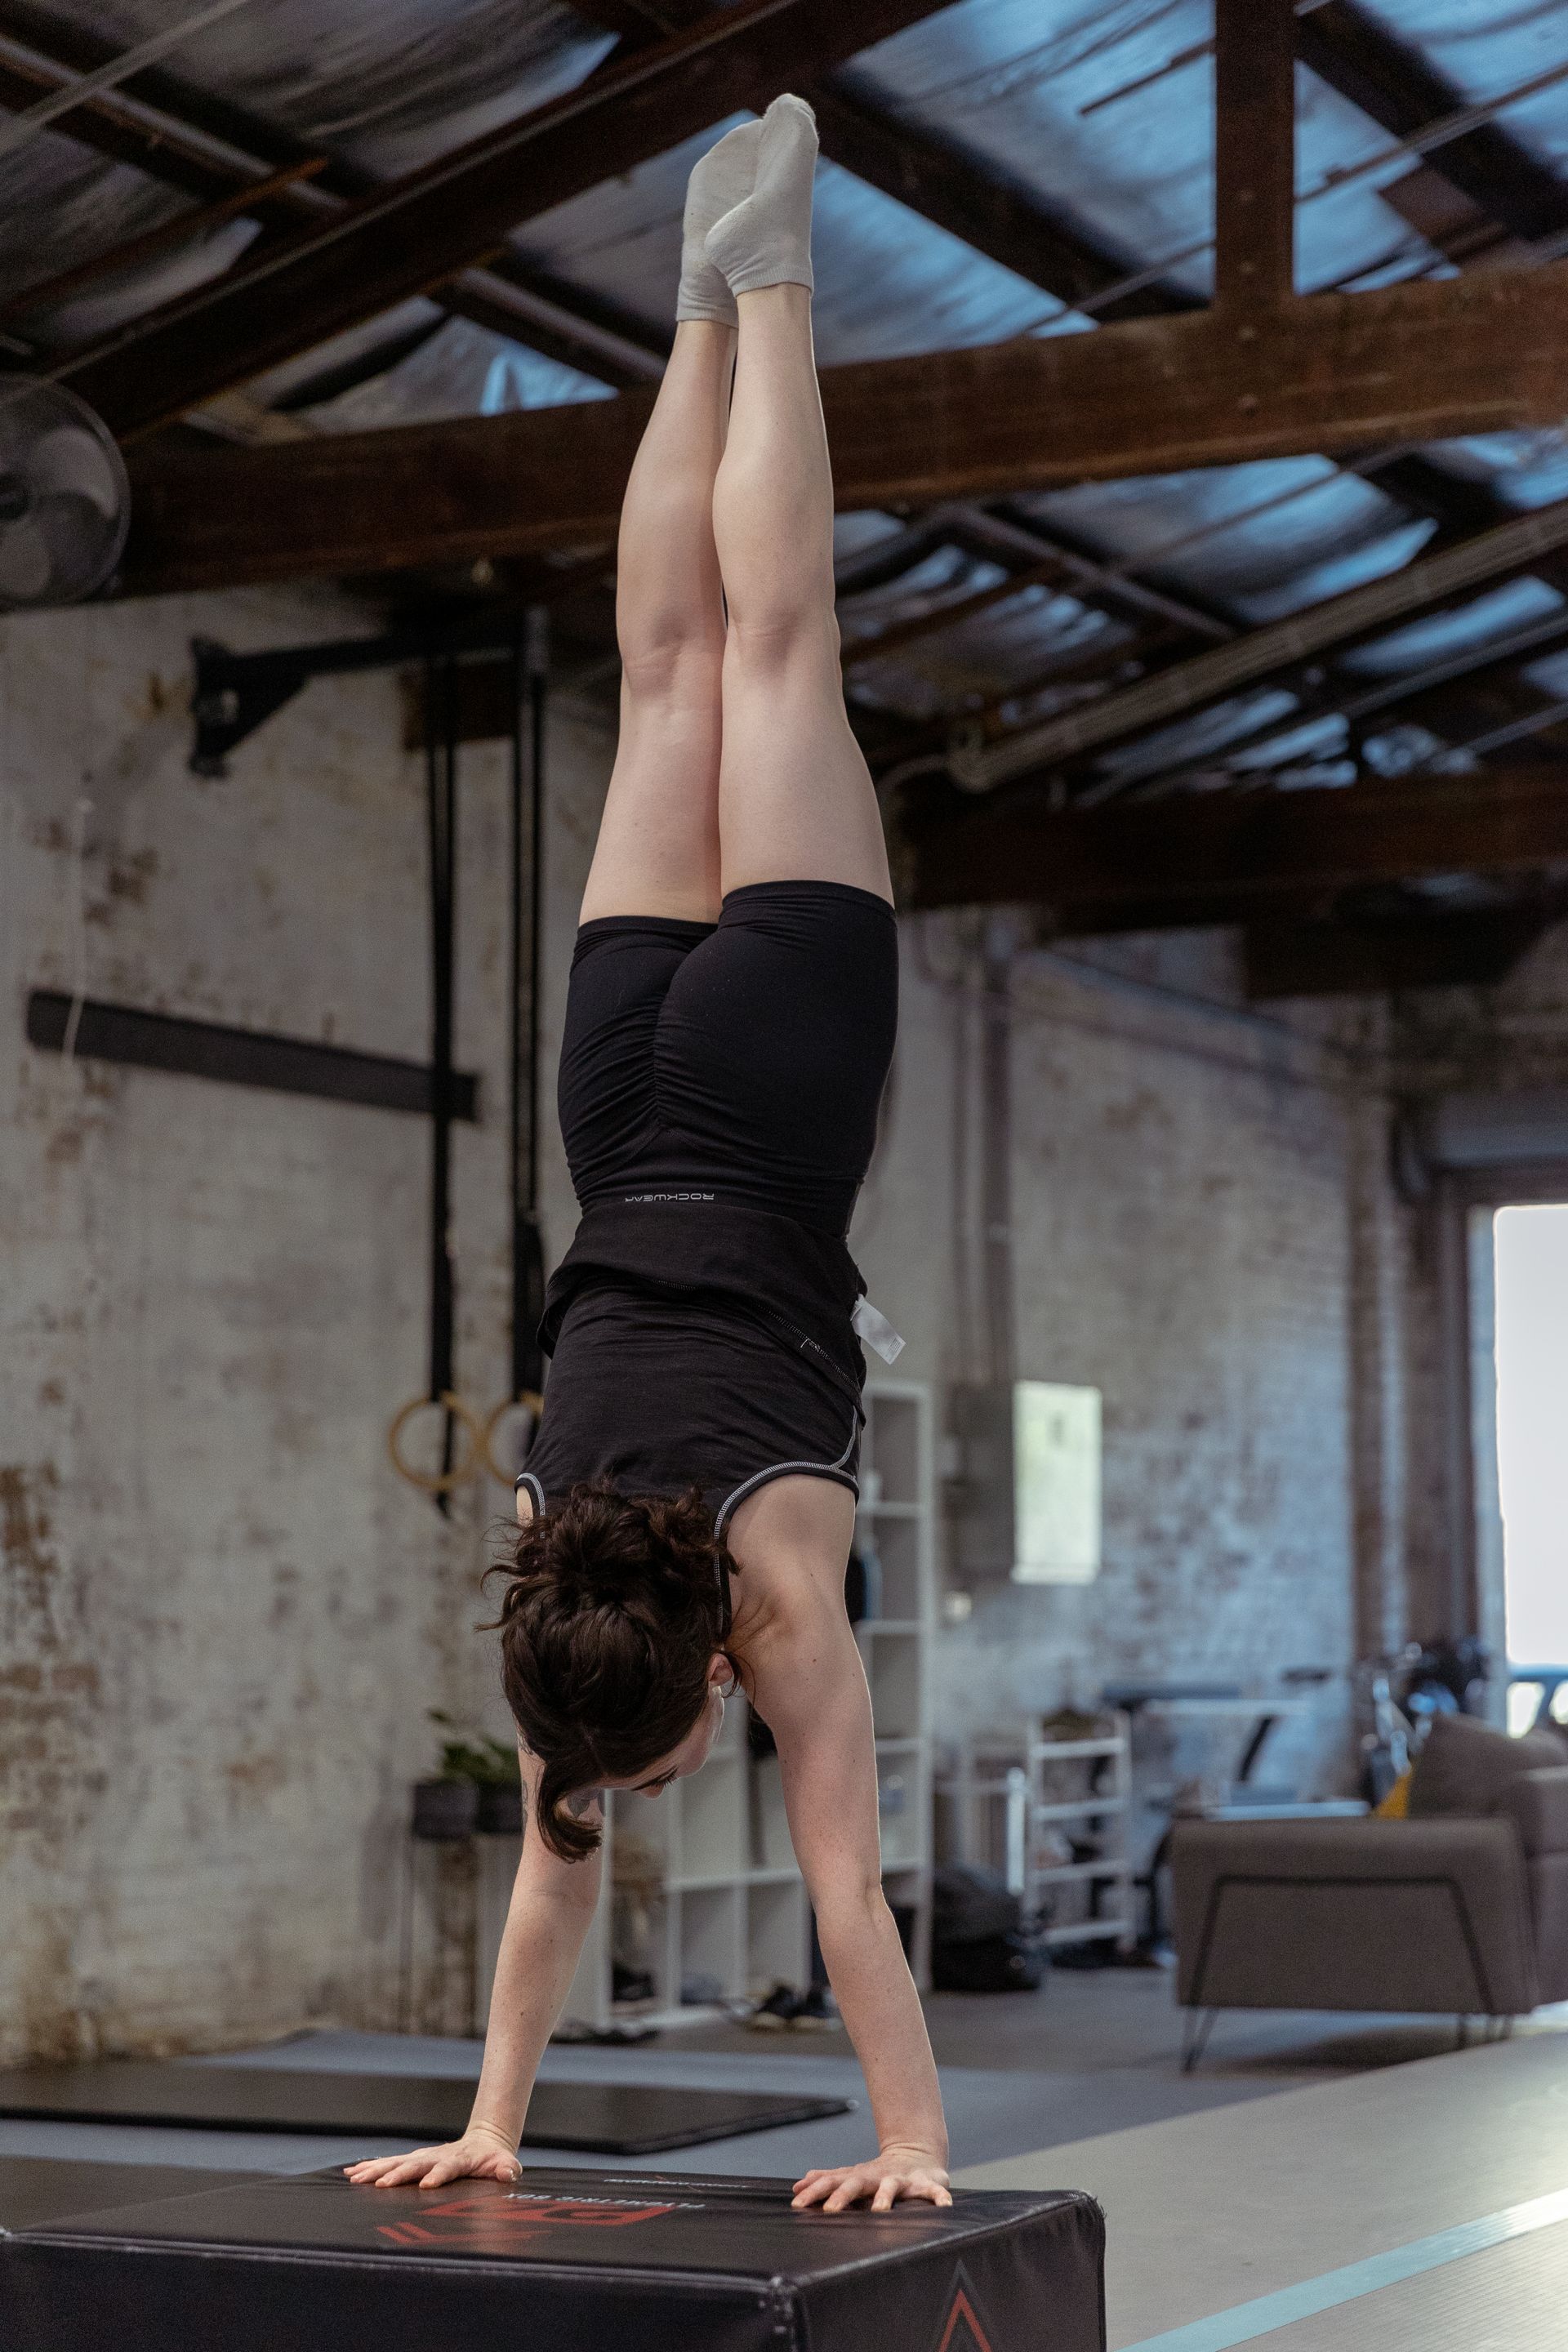 Image of a girl doing a handstand in the gym